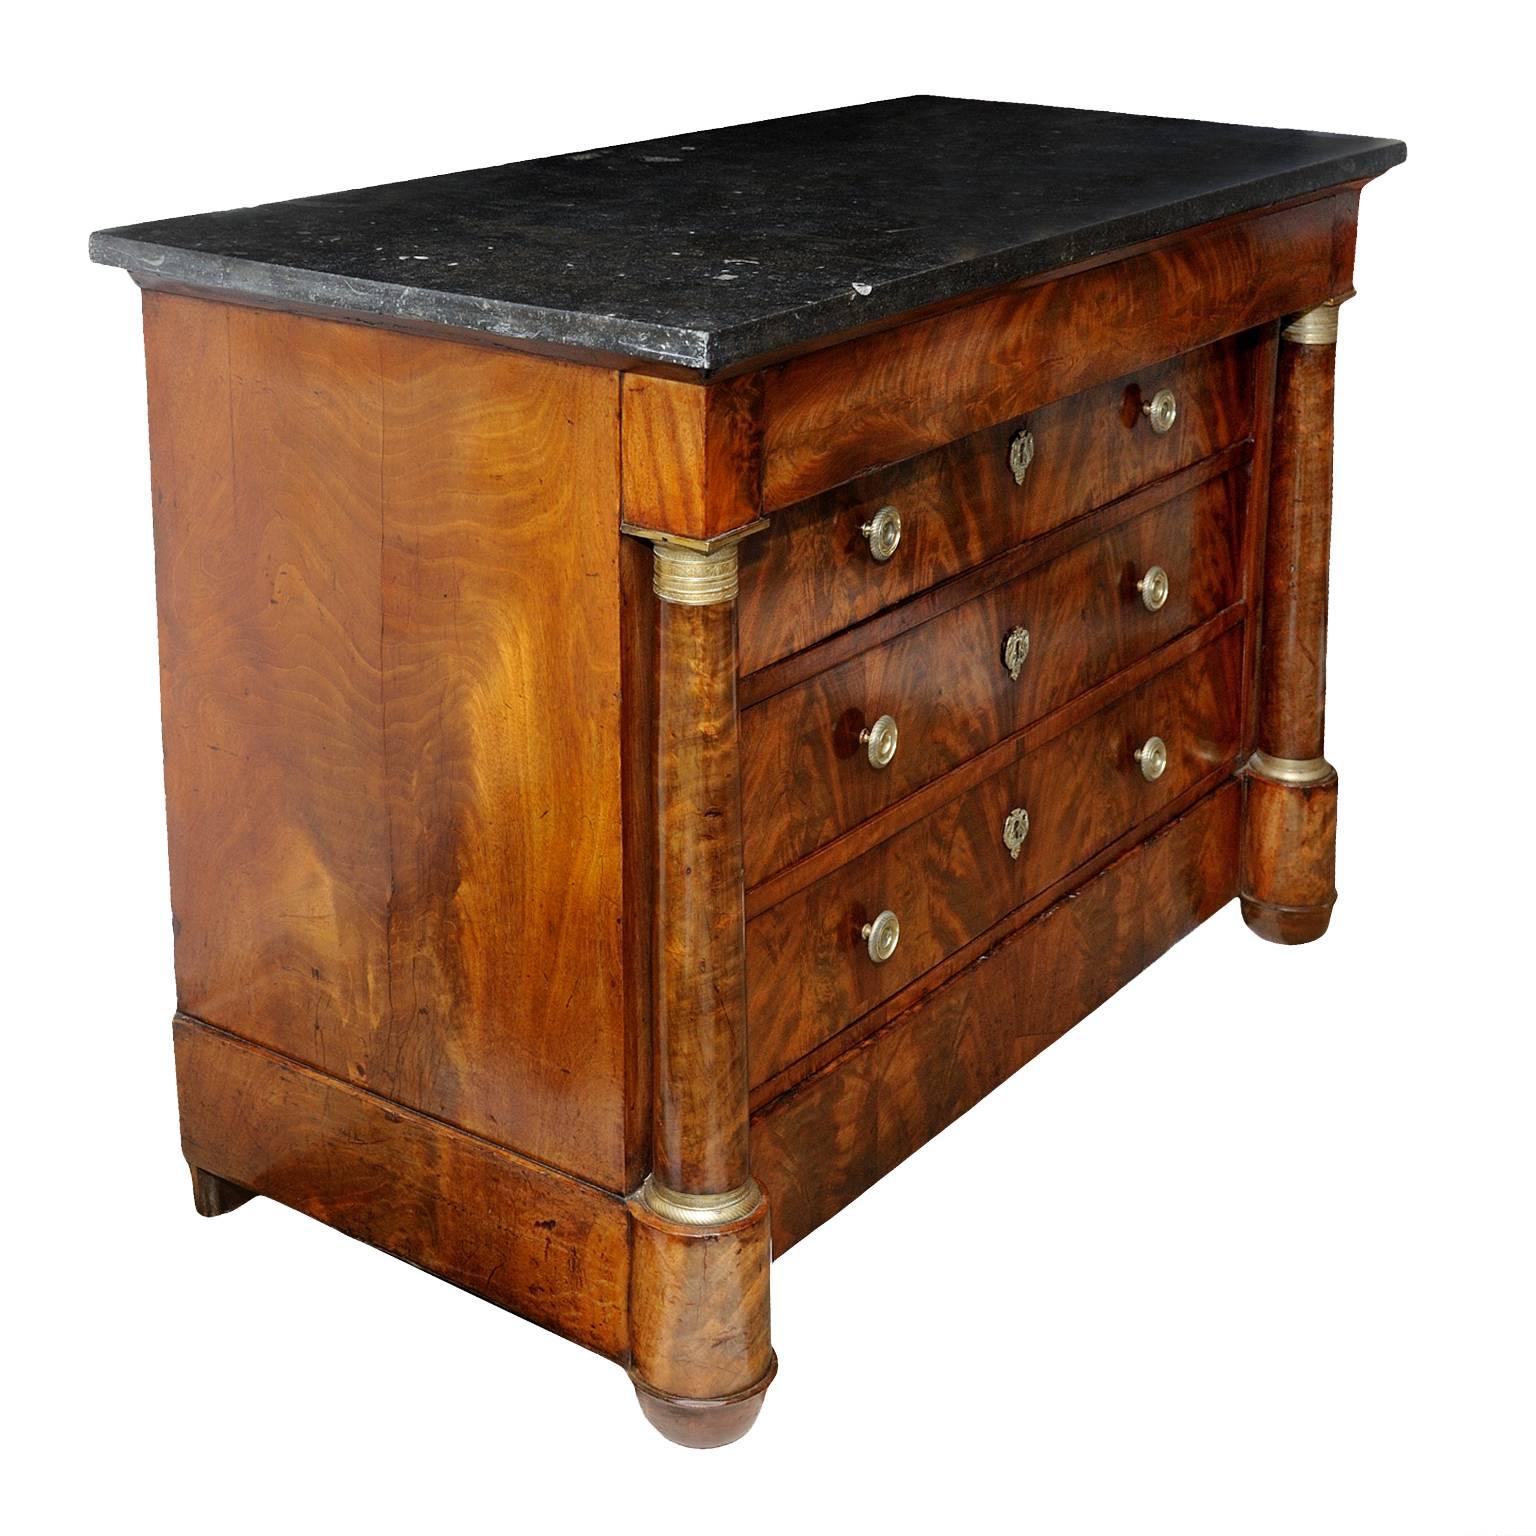 This is a very fine quality early 19th century, French Empire period flame mahogany five-drawer Napoleonic Commode, retaining its original black fossil marble top and original handles, escutcheons, locks and mounts, circa 1820. 

An absolutely